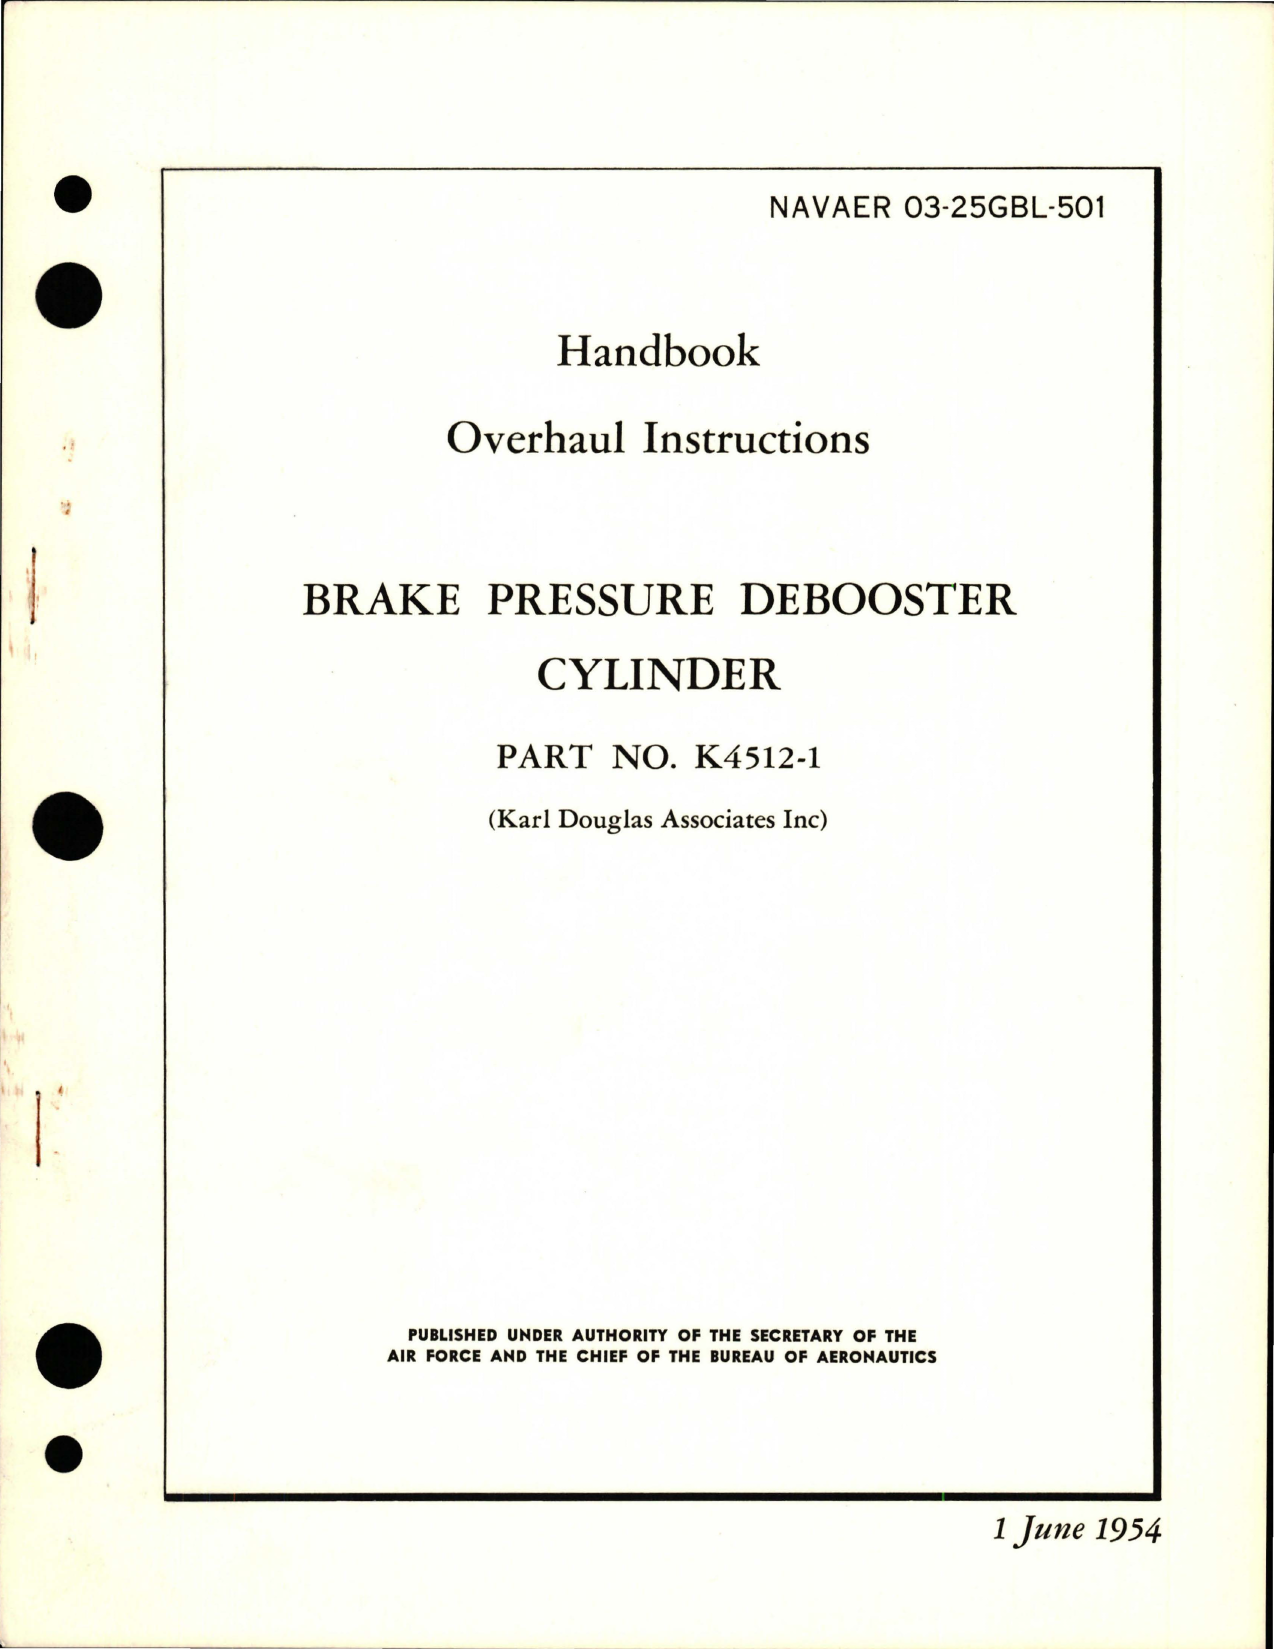 Sample page 1 from AirCorps Library document: Overhaul Instructions for Brake Pressure Debooster Cylinder - Part K4512-1